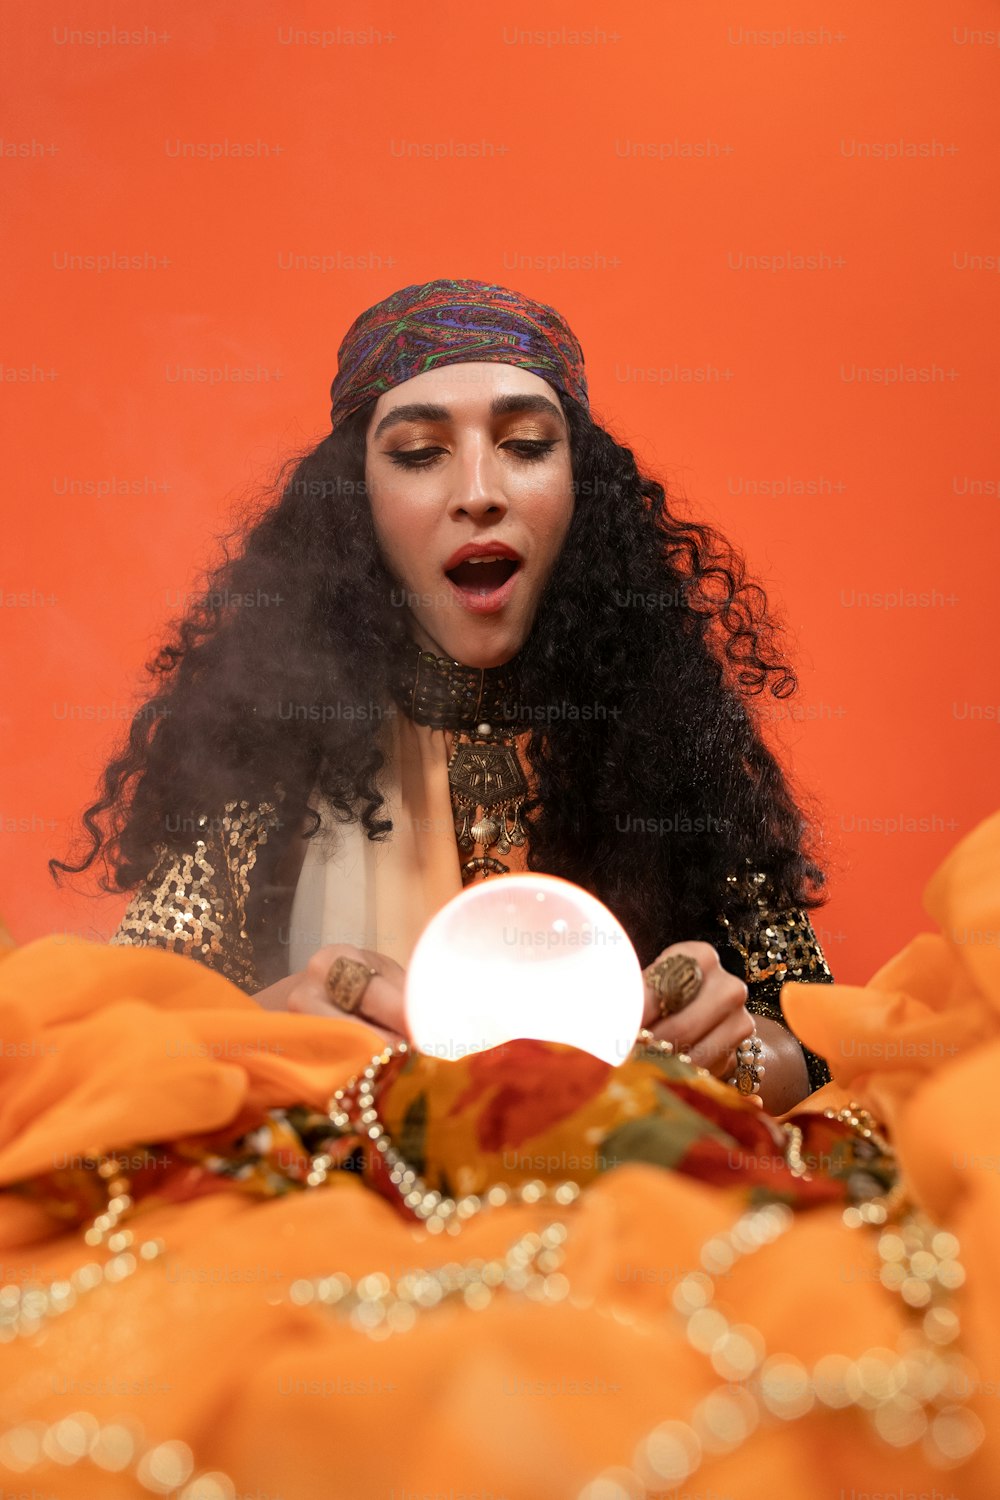 a person wearing a headdress and holding a light bulb